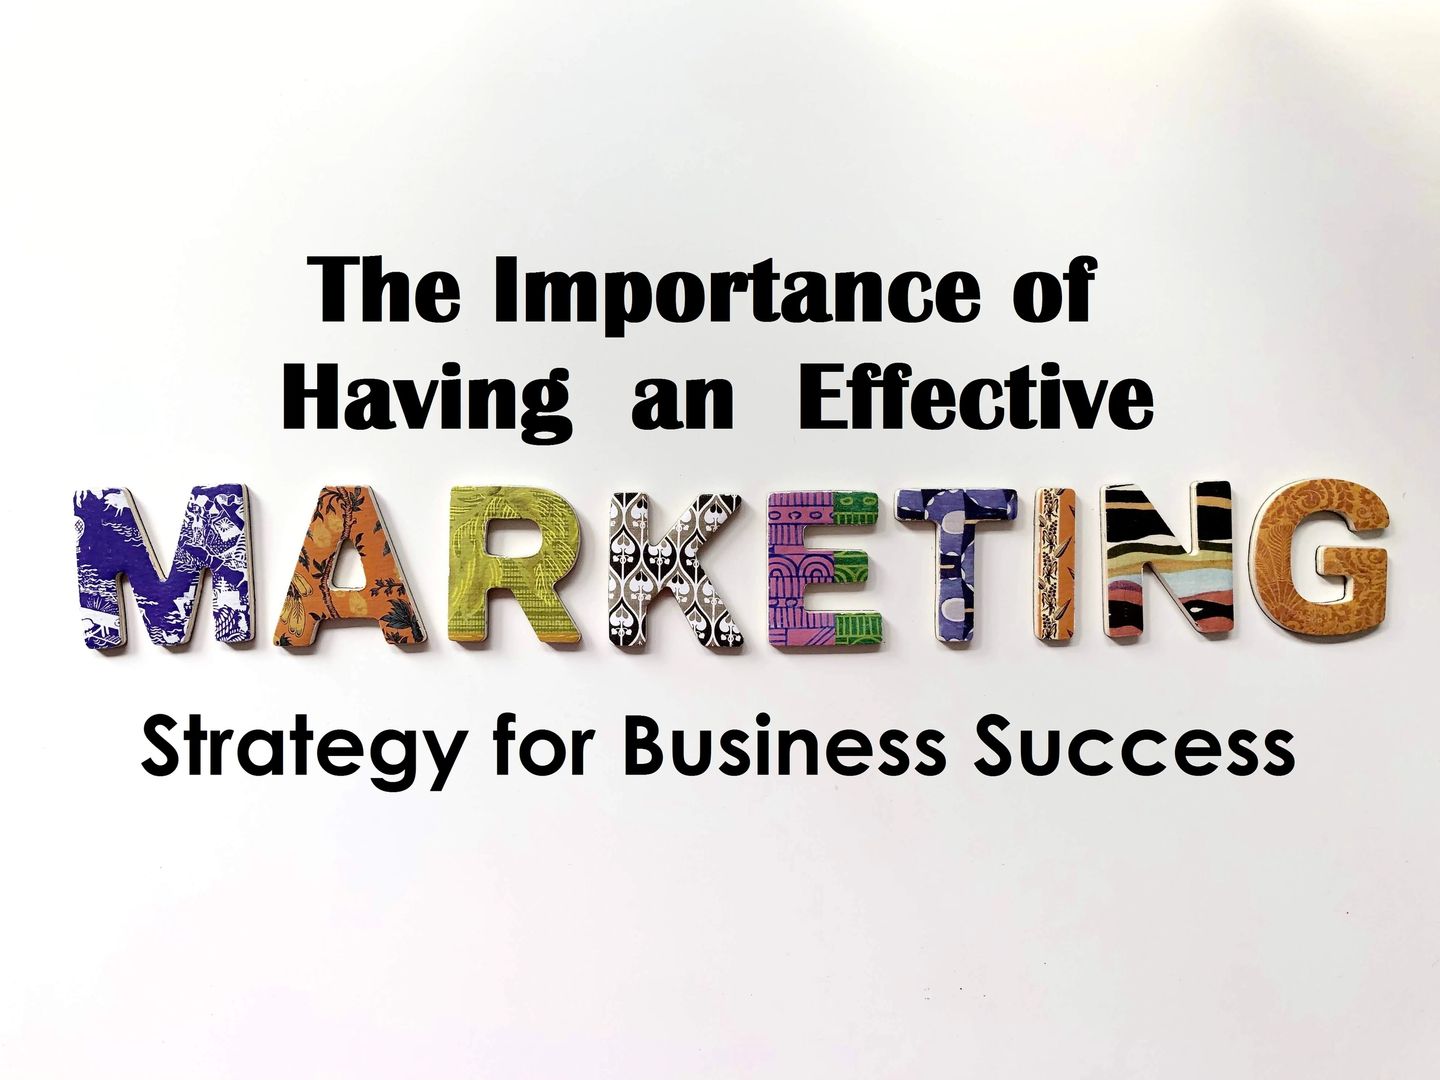 The Importance of Having an Effective Marketing Strategy for Business Success